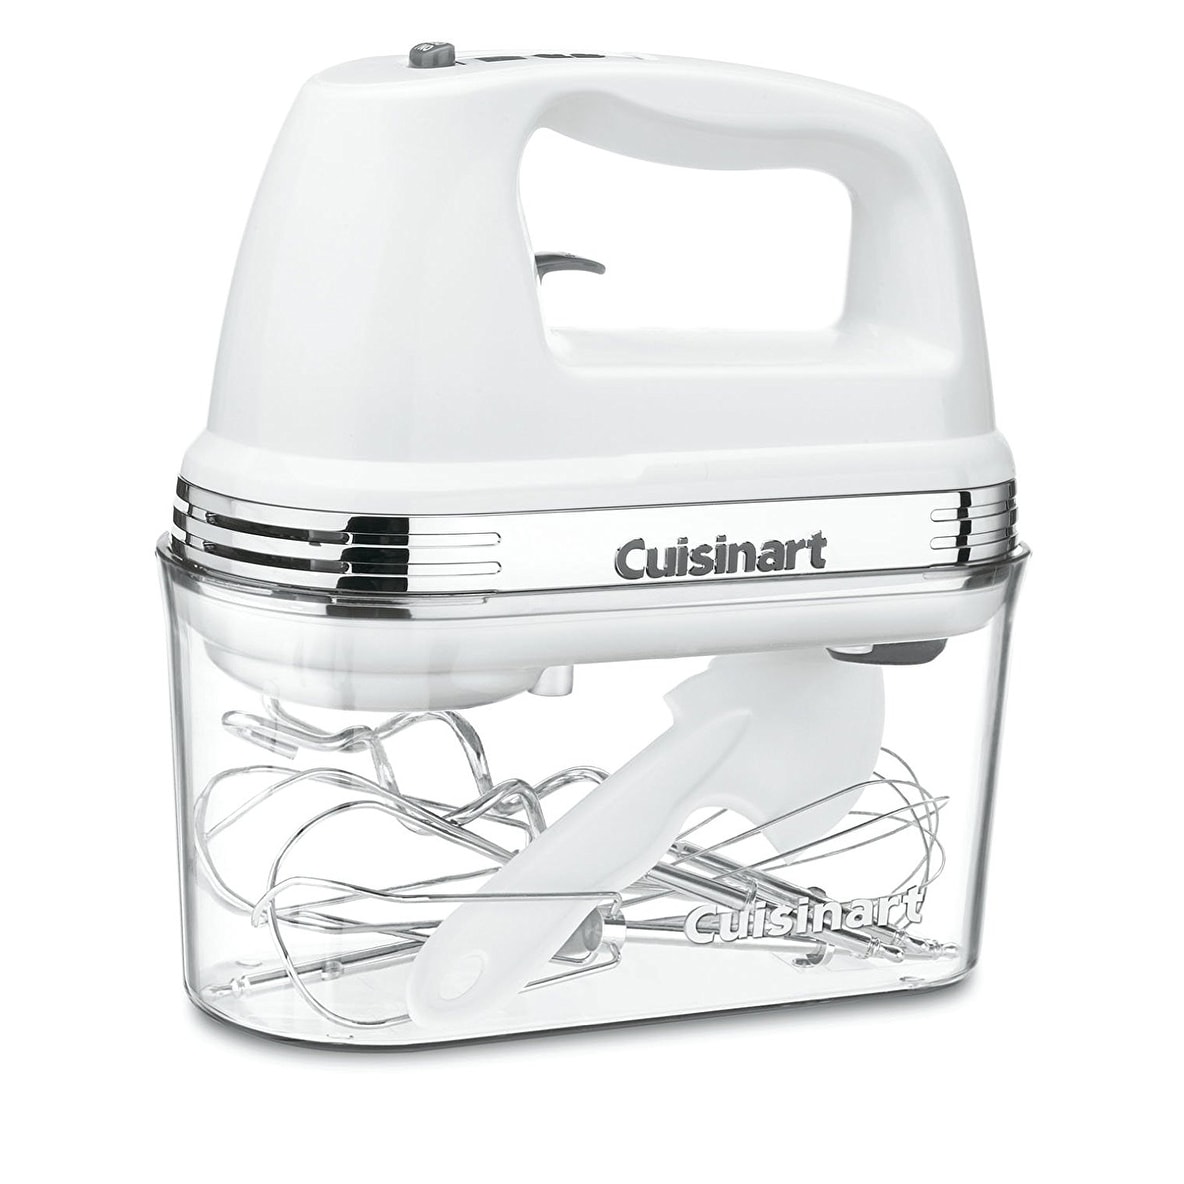 https://ak1.ostkcdn.com/images/products/is/images/direct/76aa1d3973b7180125e6e2d81c6f0be57ddd404c/Cuisinart-HM-90S-Power-Advantage-Plus-9-Speed-Handheld-Mixer-with-Storage-Case%2C-White.jpg